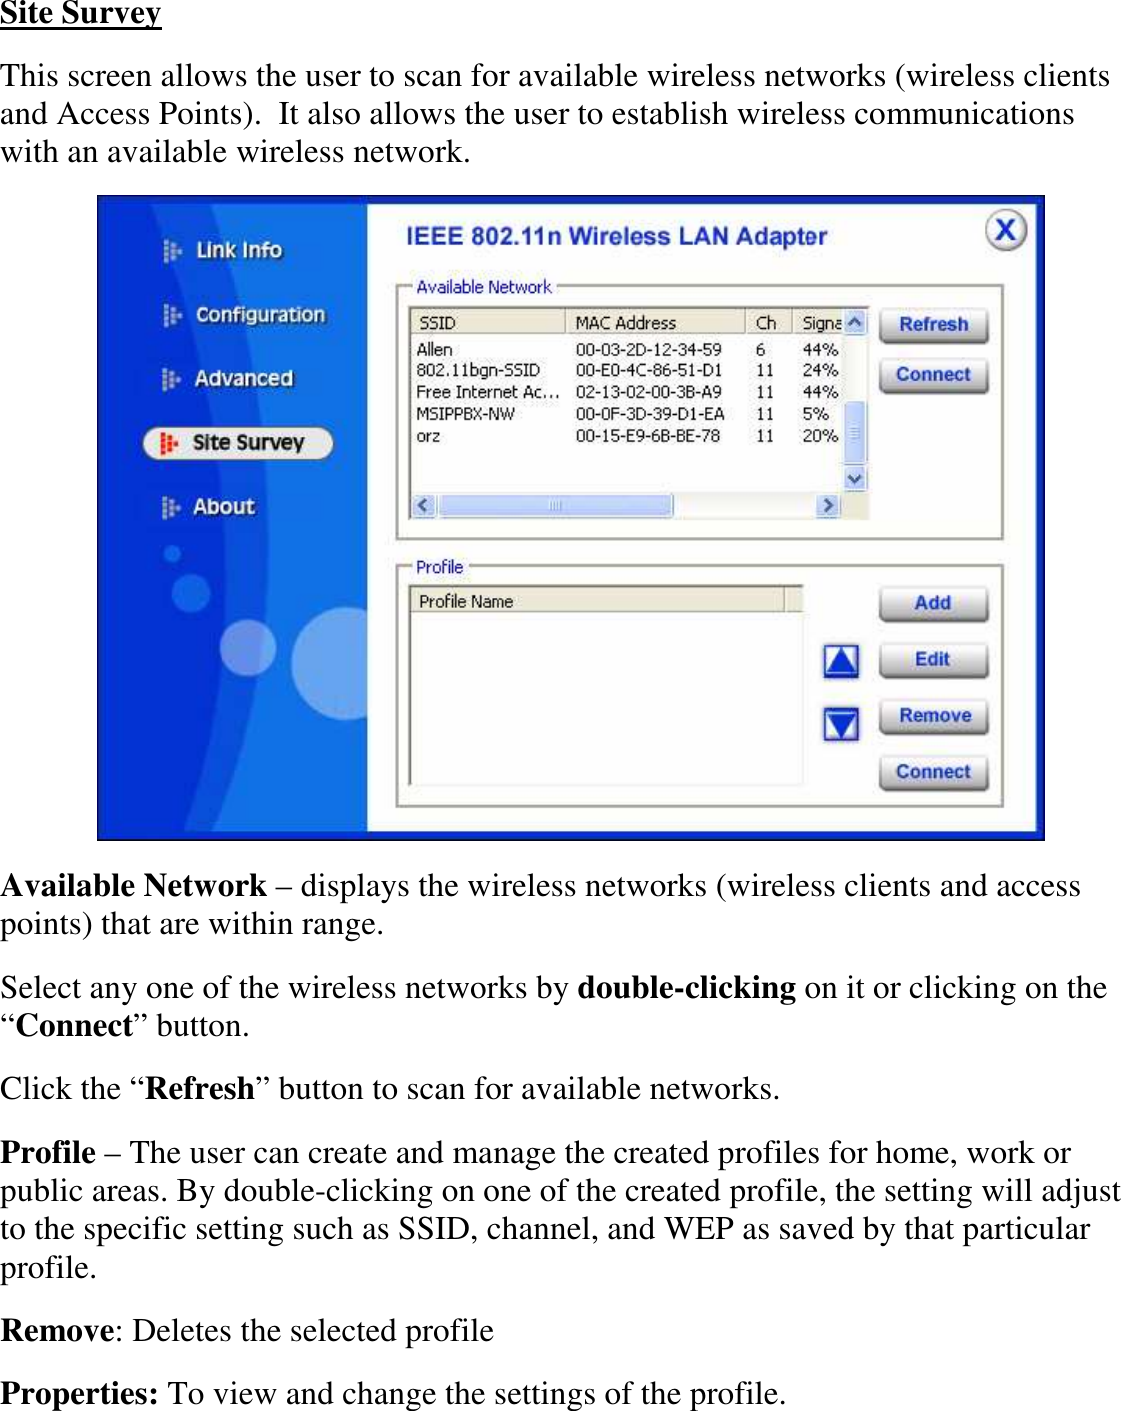  Site Survey This screen allows the user to scan for available wireless networks (wireless clients and Access Points).  It also allows the user to establish wireless communications with an available wireless network.  Available Network – displays the wireless networks (wireless clients and access points) that are within range.  Select any one of the wireless networks by double-clicking on it or clicking on the “Connect” button. Click the “Refresh” button to scan for available networks. Profile – The user can create and manage the created profiles for home, work or public areas. By double-clicking on one of the created profile, the setting will adjust to the specific setting such as SSID, channel, and WEP as saved by that particular profile. Remove: Deletes the selected profile Properties: To view and change the settings of the profile. 